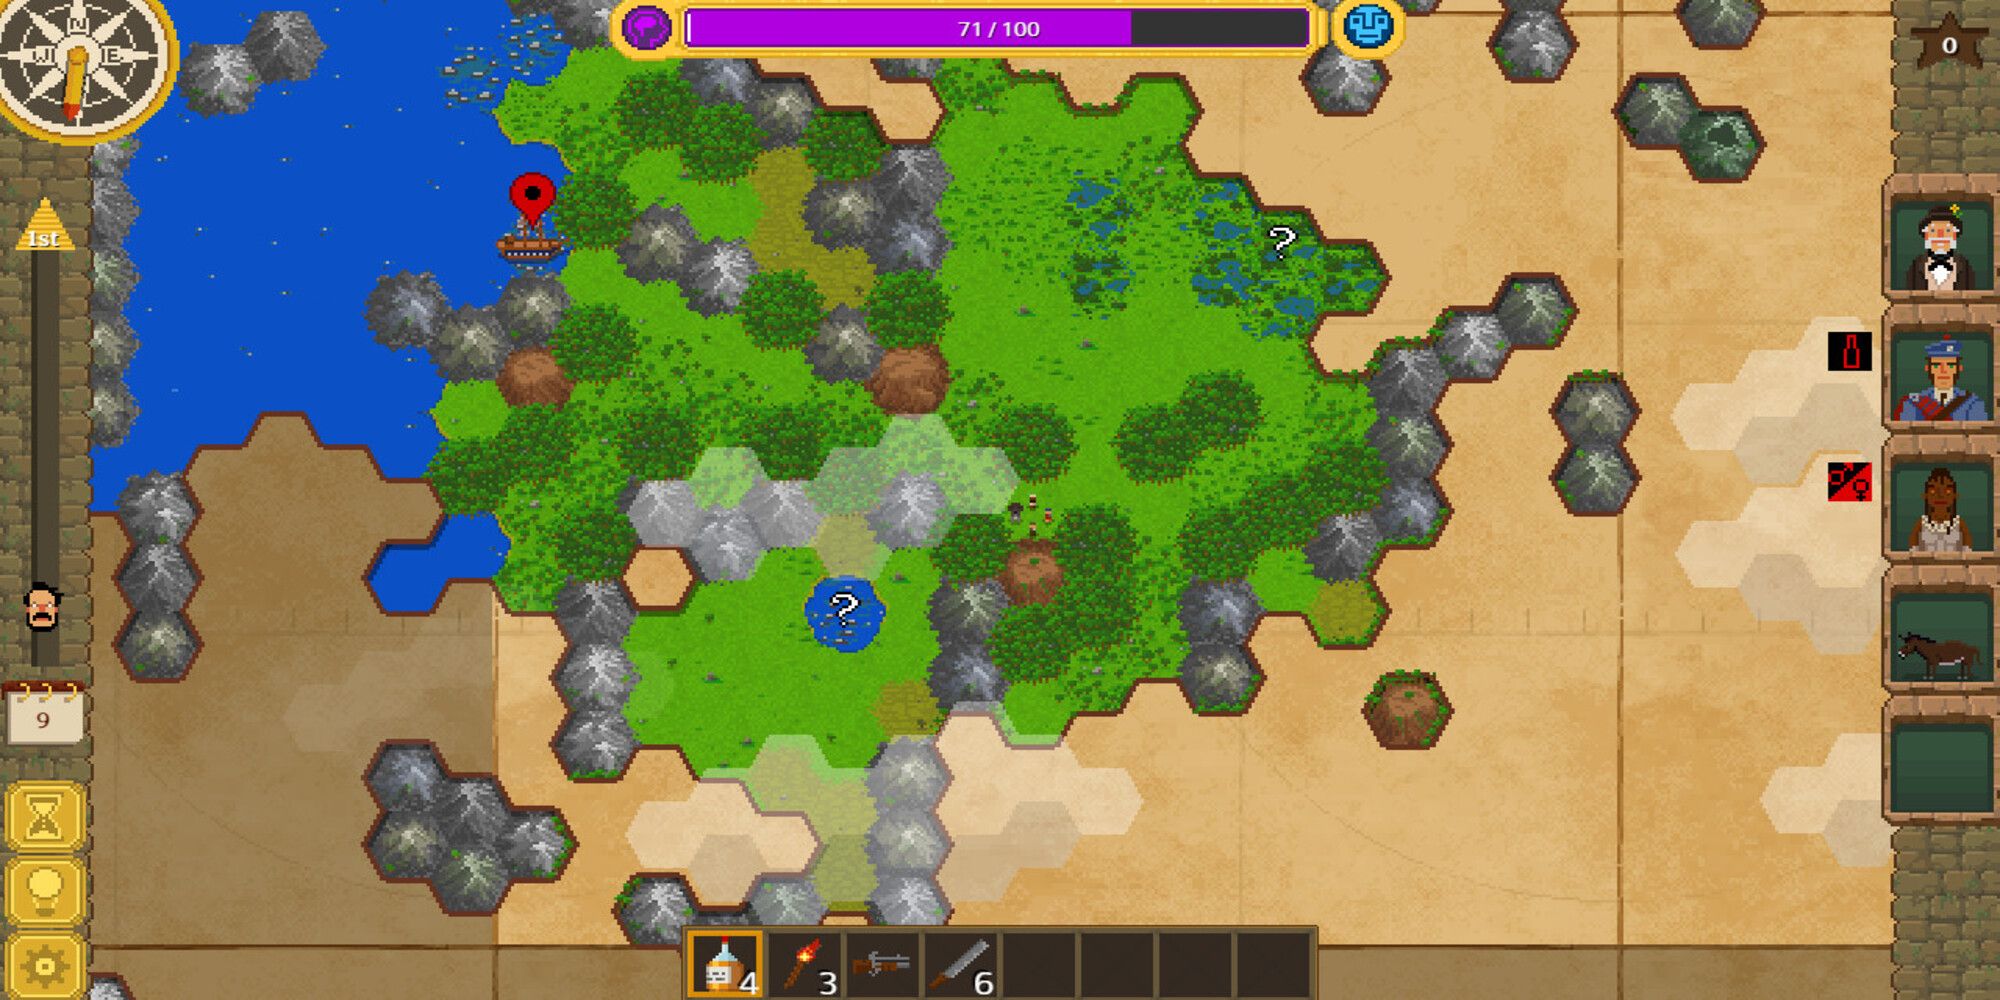 An in-game screenshot of Curious Expedition showing the map and various tiles